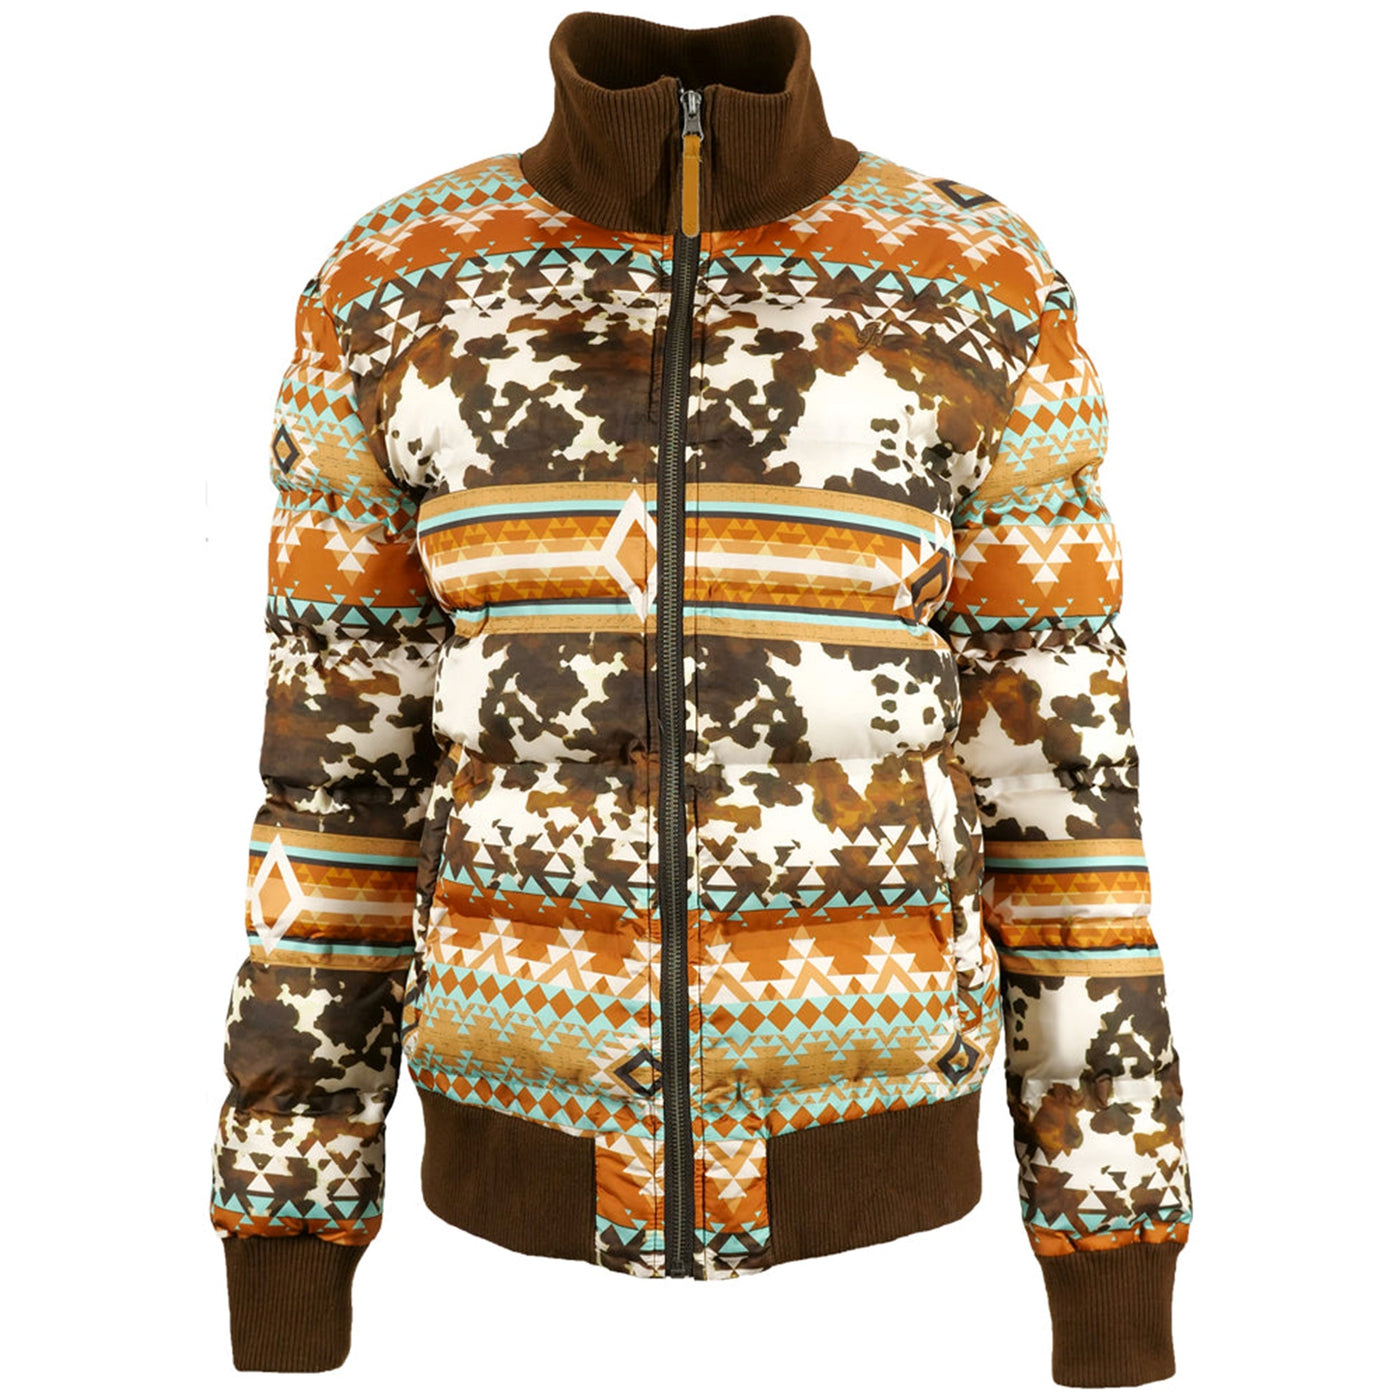 Hooey Women's Tan and Brown Quilted Track Jacket